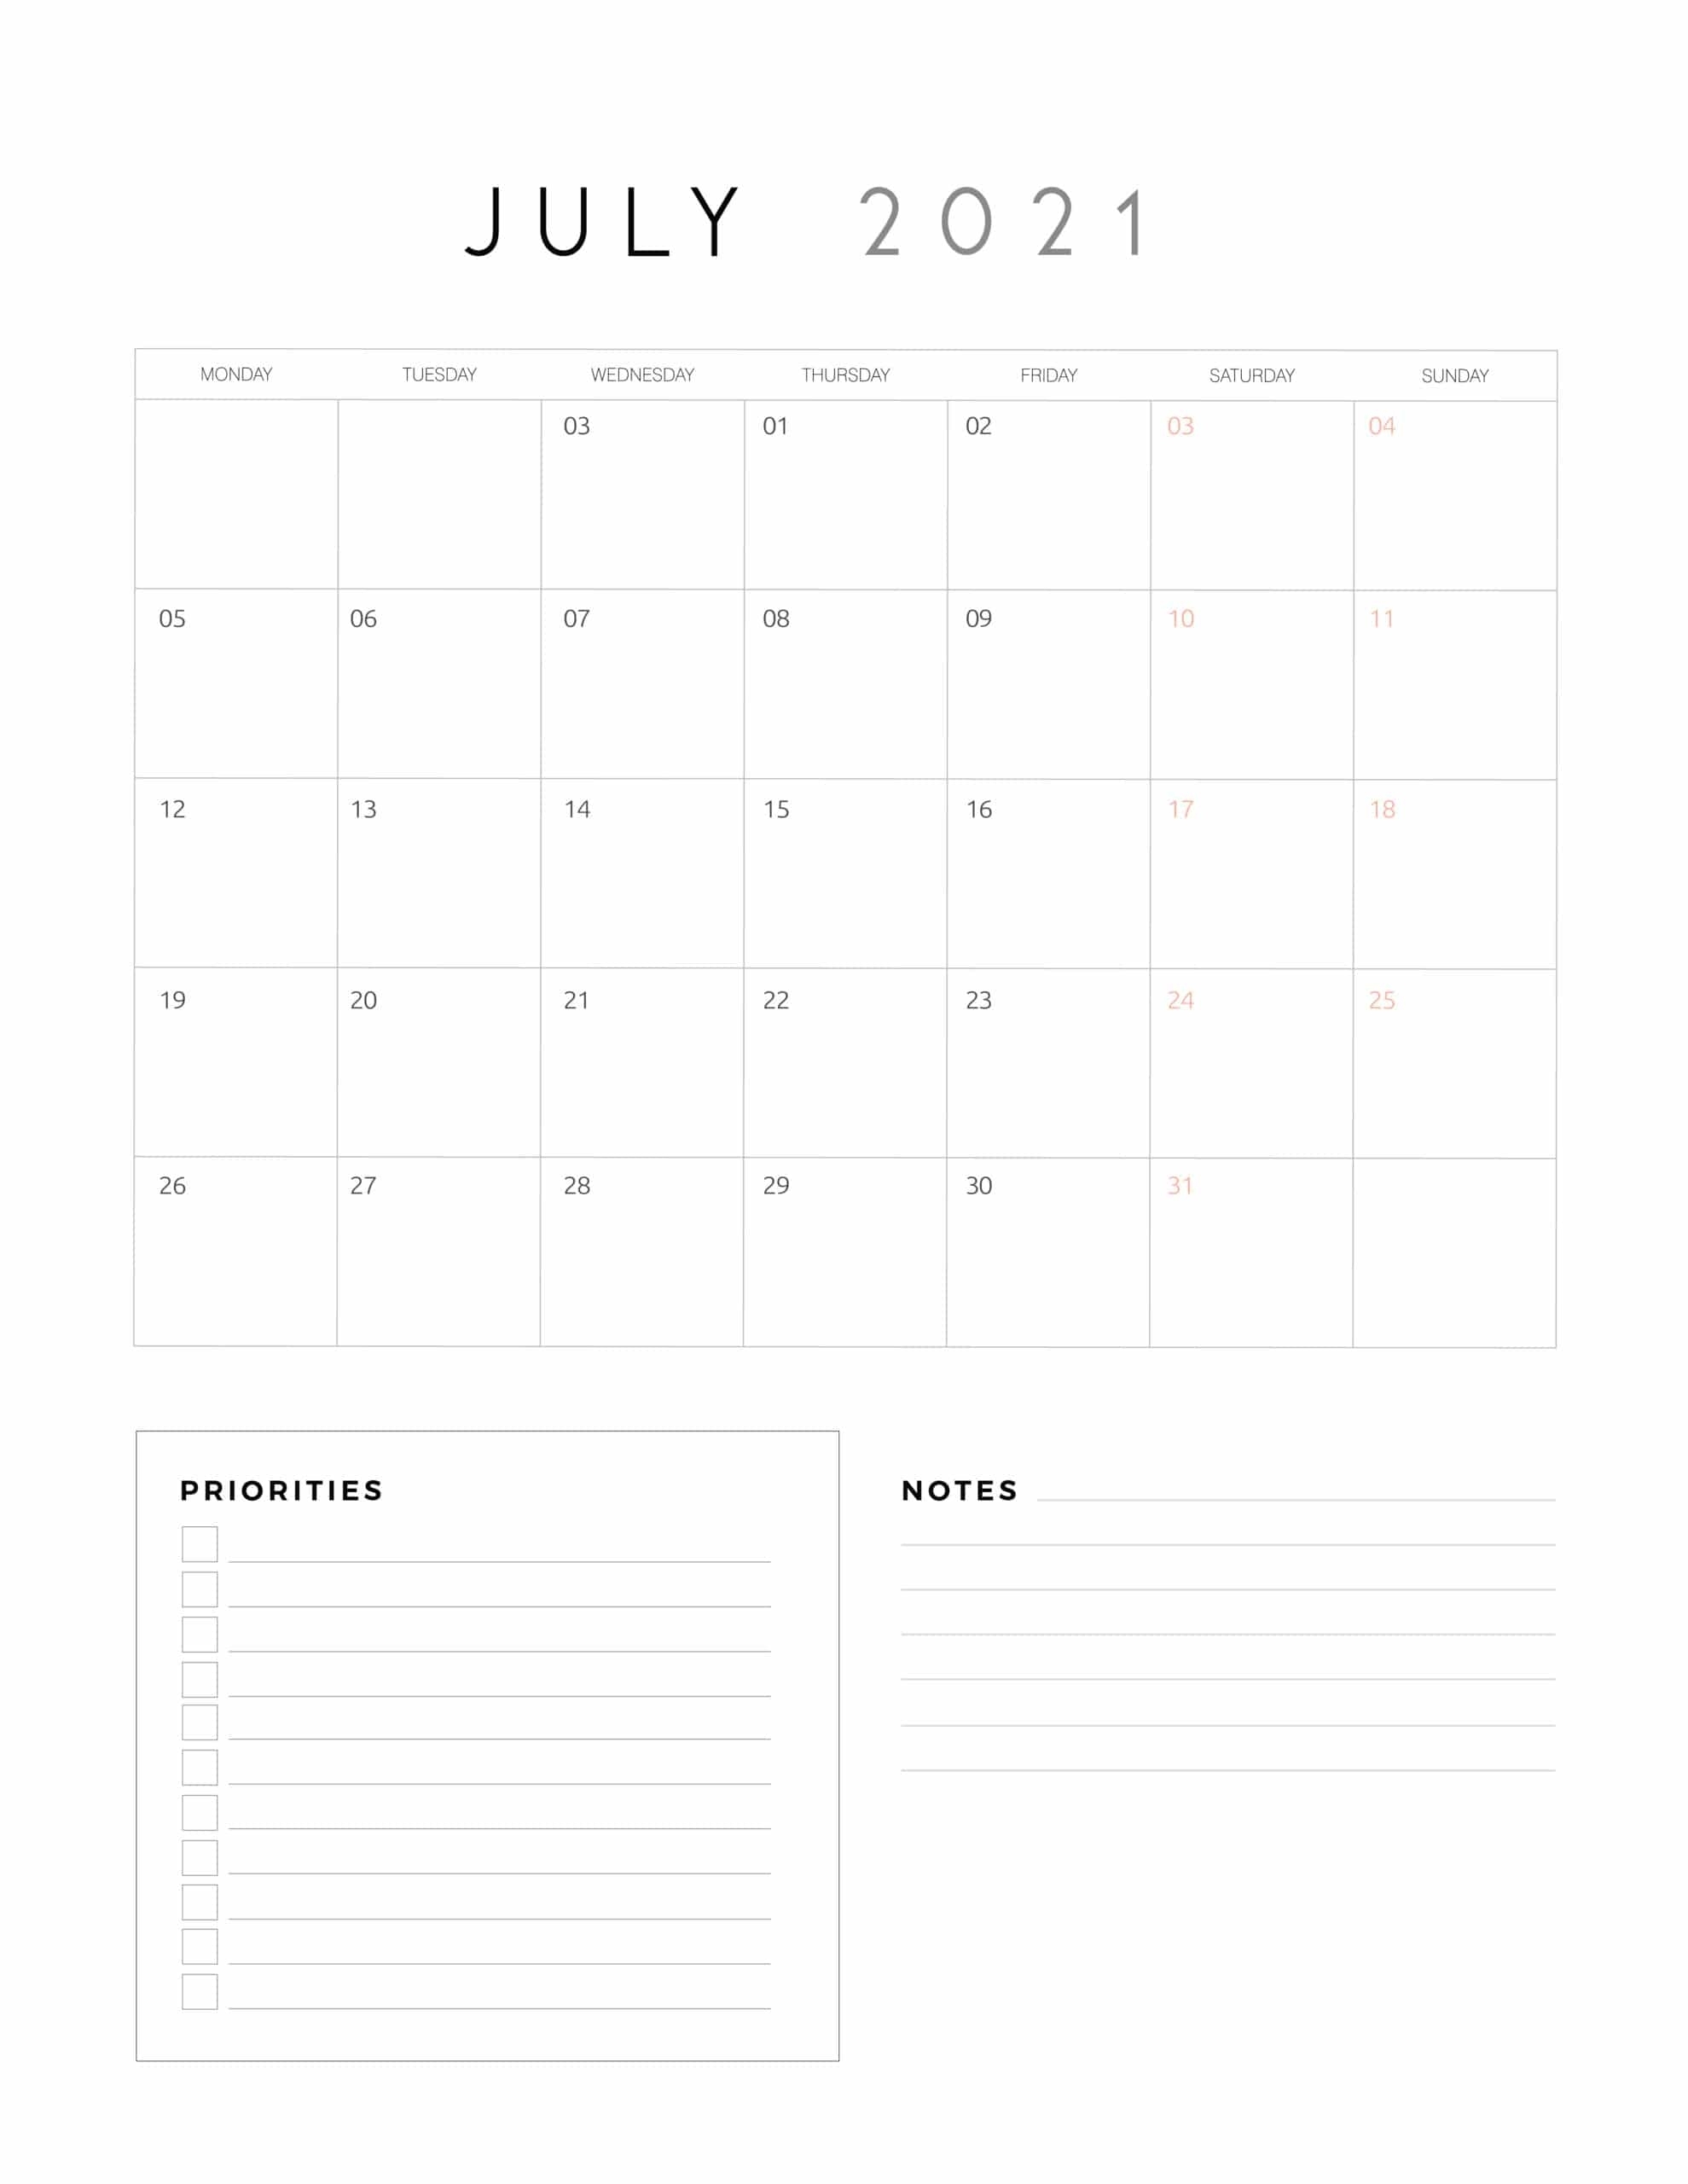 2021 Calendar With Priorities And Notes - World Of Printables